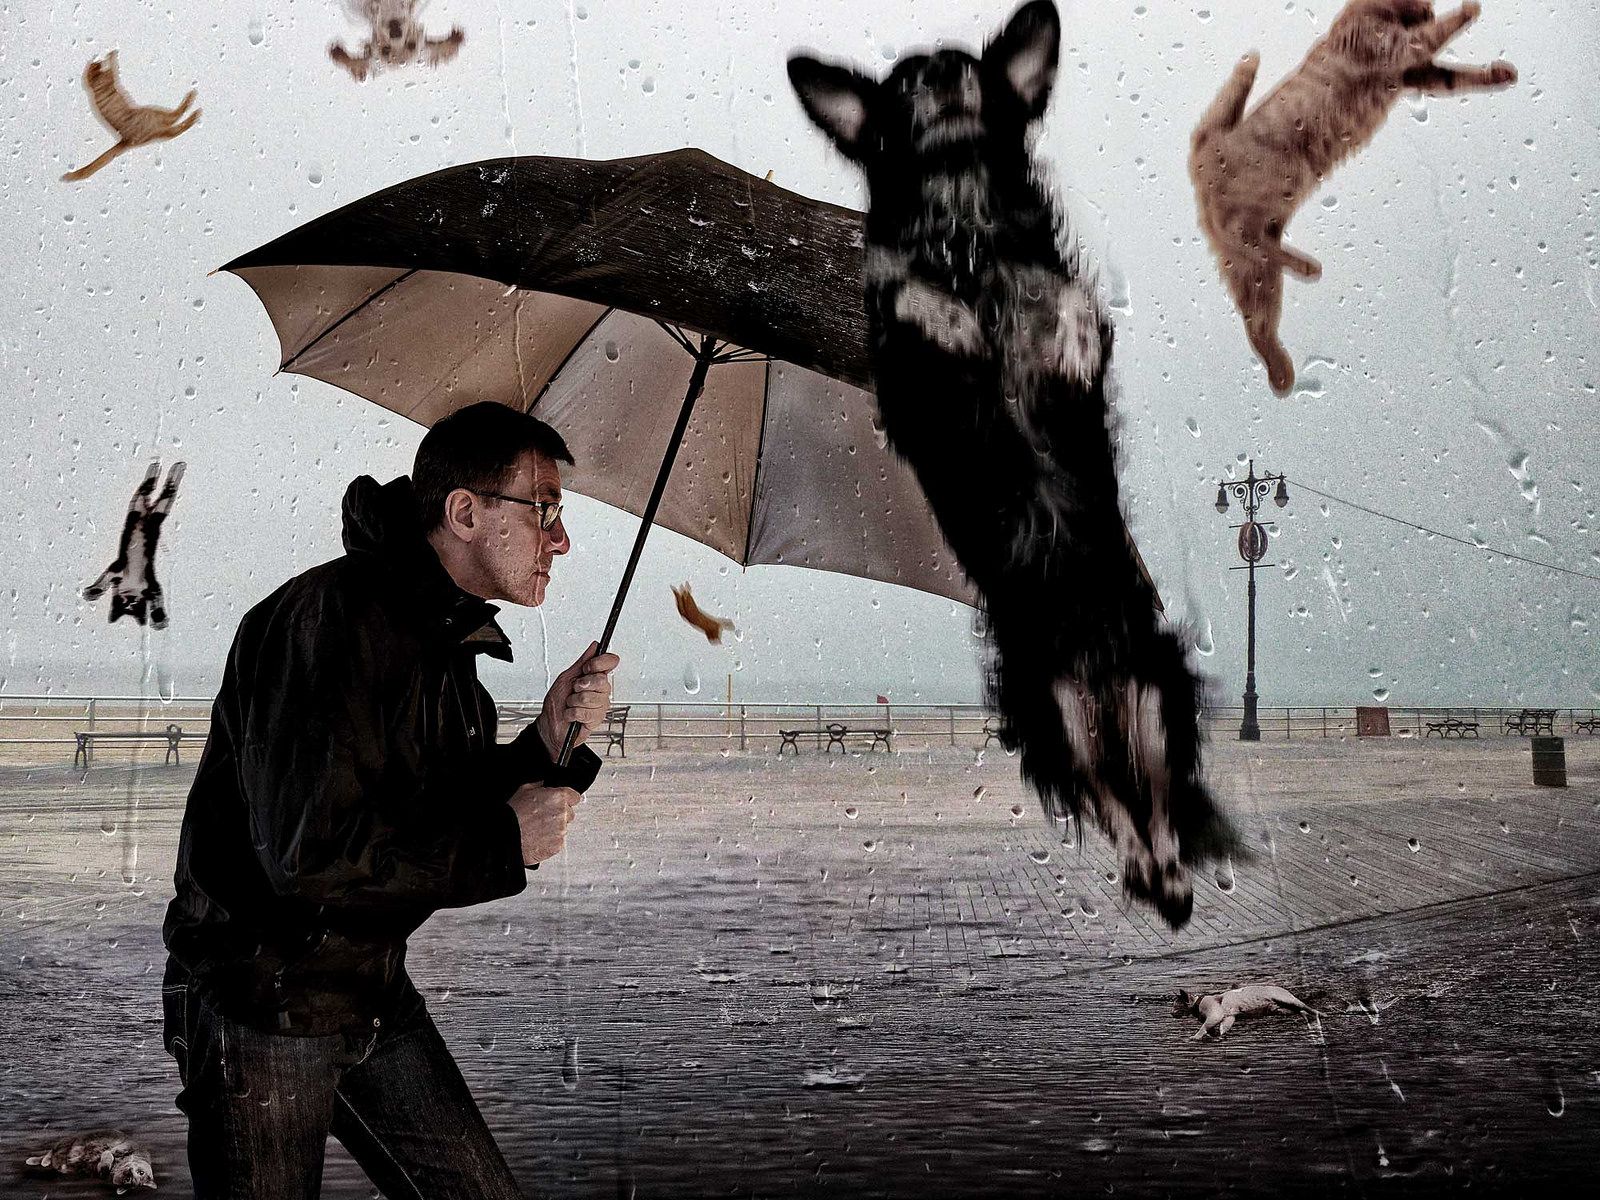 raining cats and dogs. Lexical Lablexicallab.com